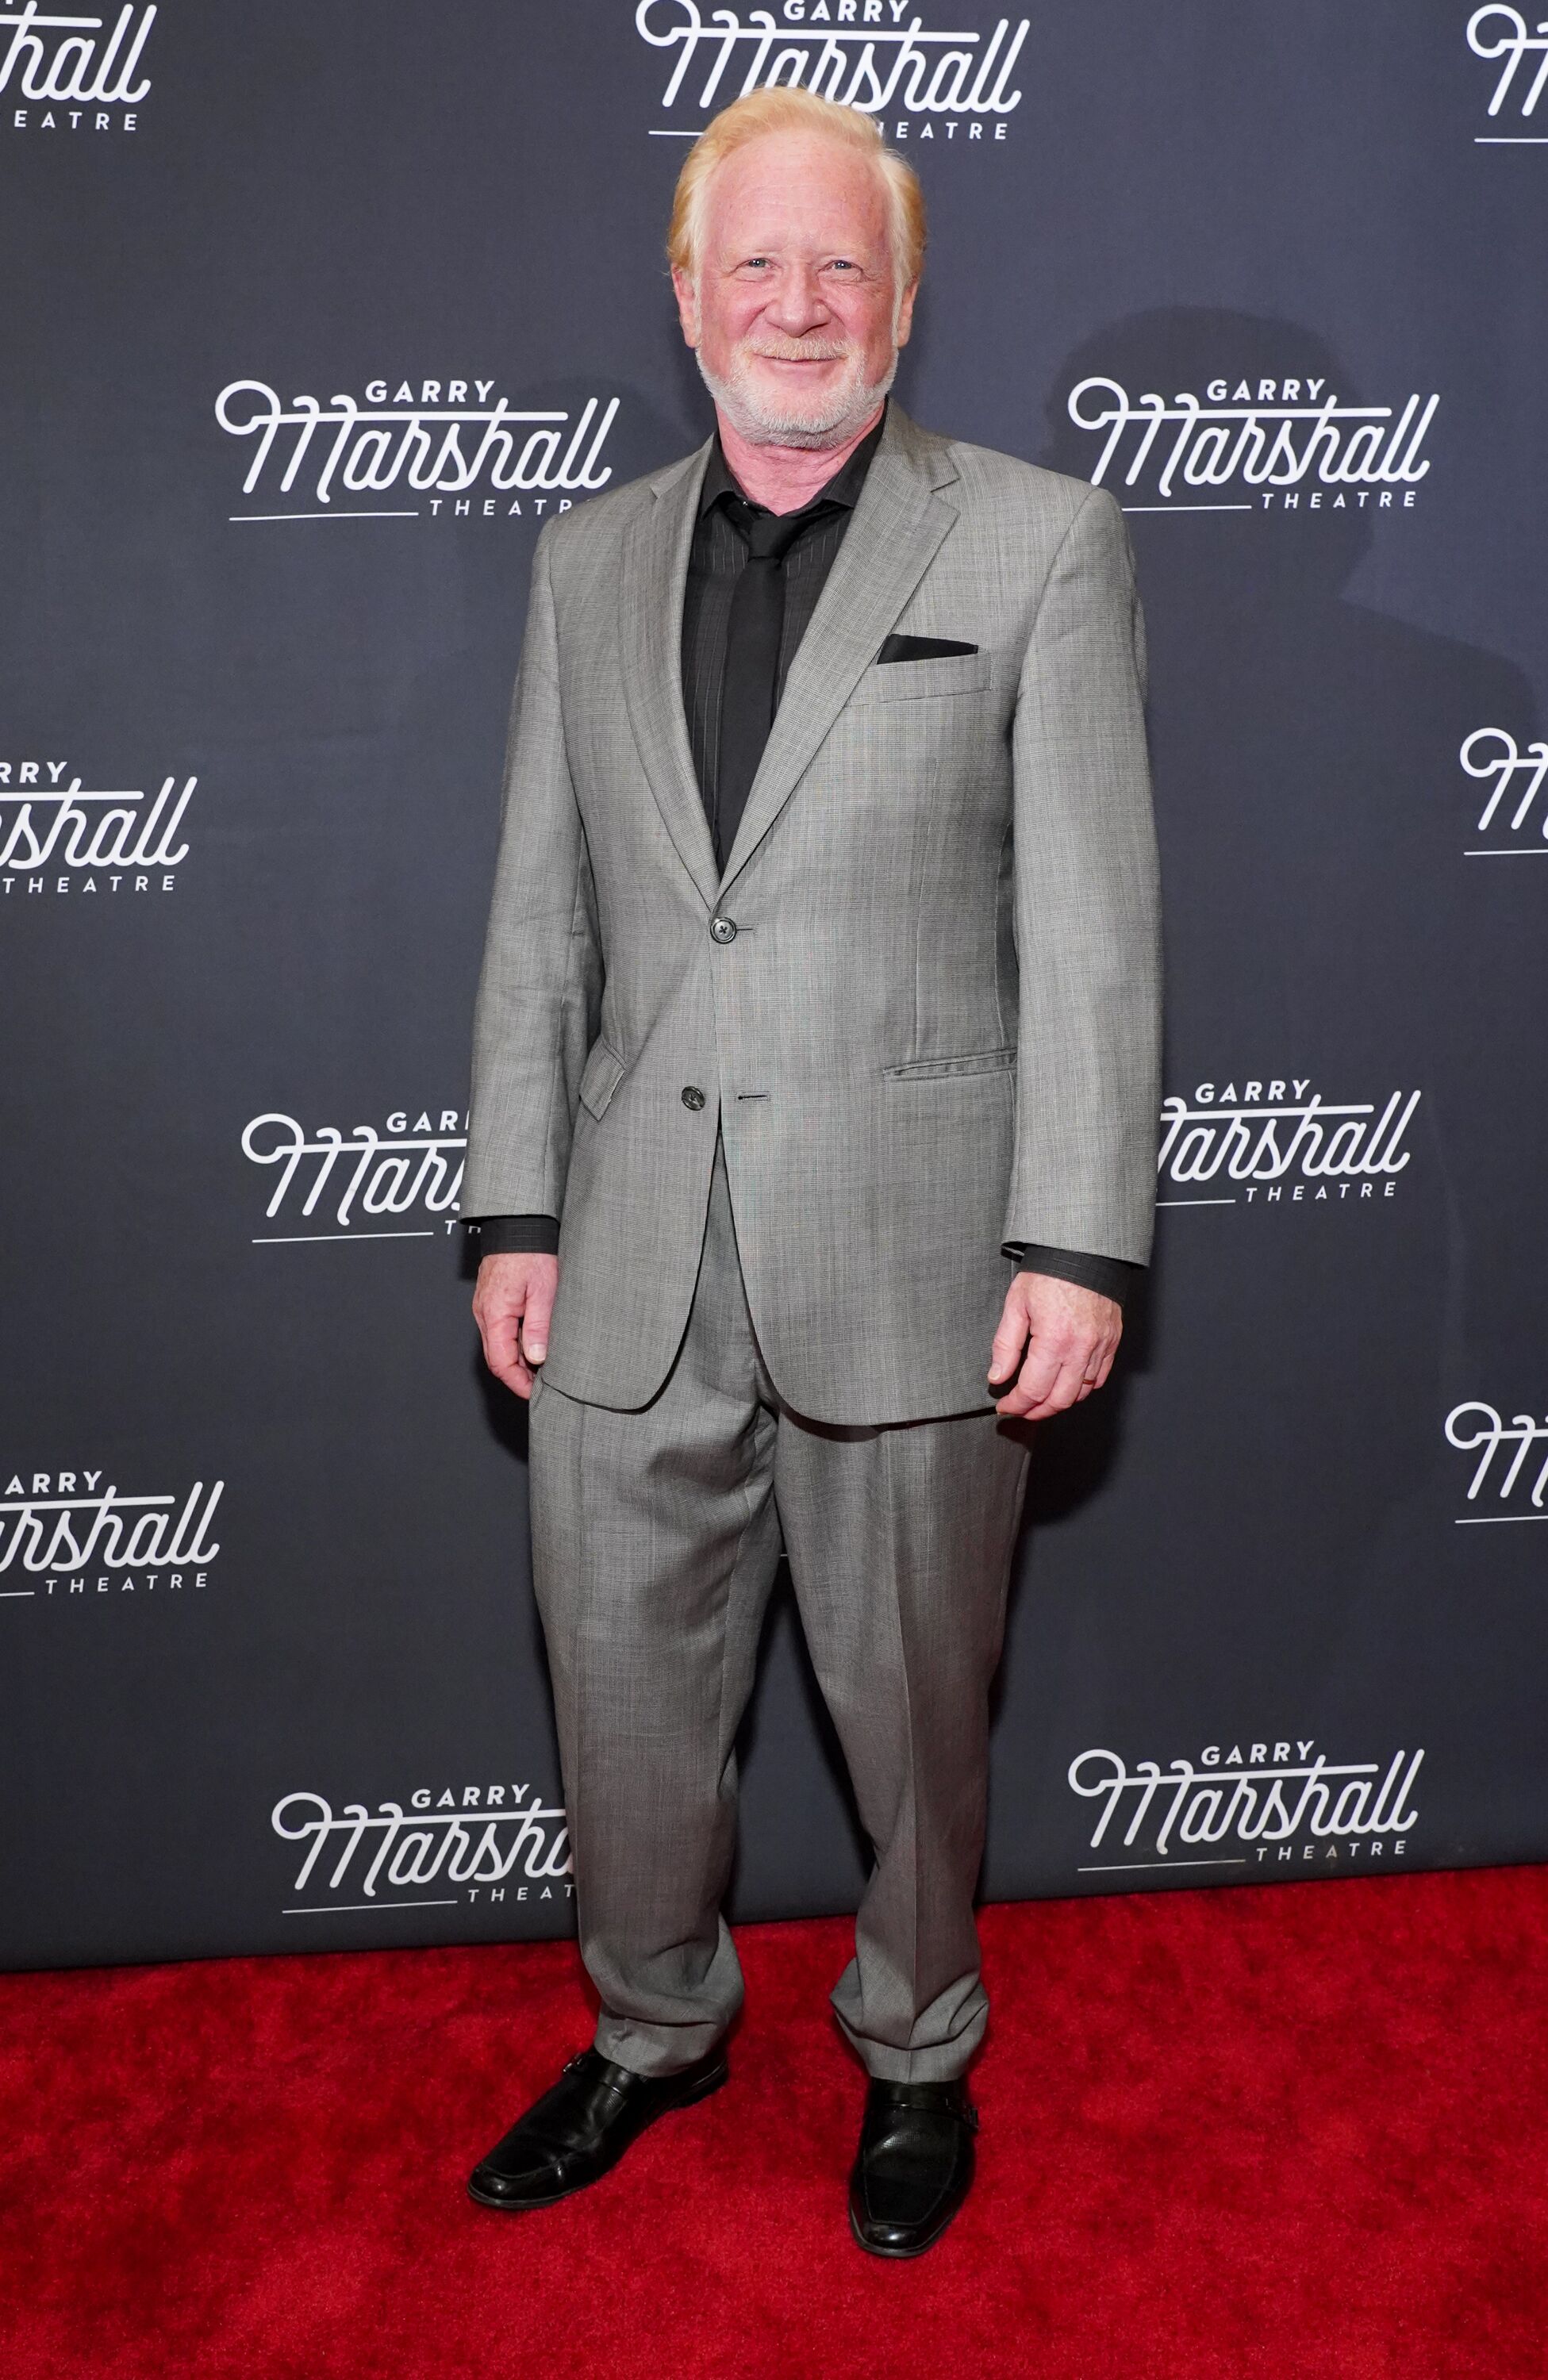 Don Most attends Garry Marshall Theatre's 3rd Annual Founder's Gala Honoring Original "Happy Days" Cast at The Jonathan Club on November 13, 2019 in Los Angeles, California. | Source: Getty Images